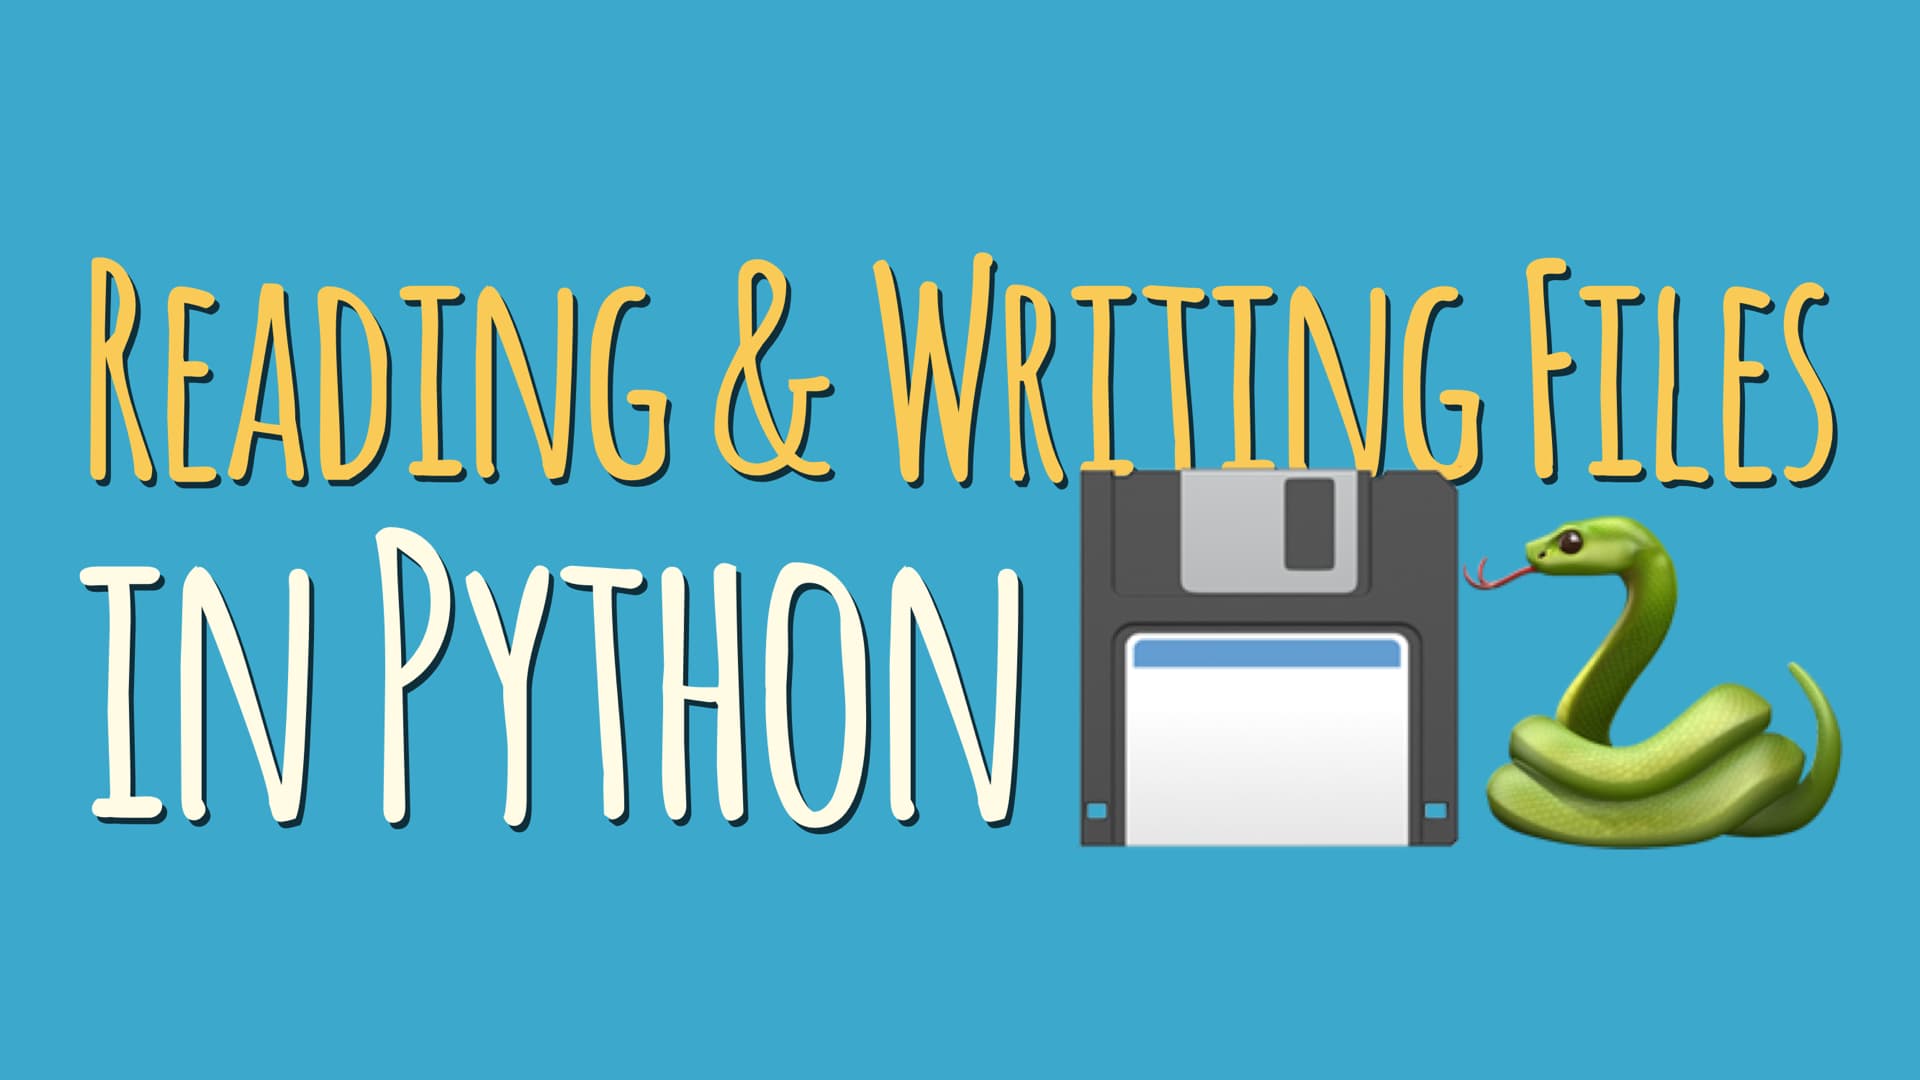 Reading and Writing Files in Python